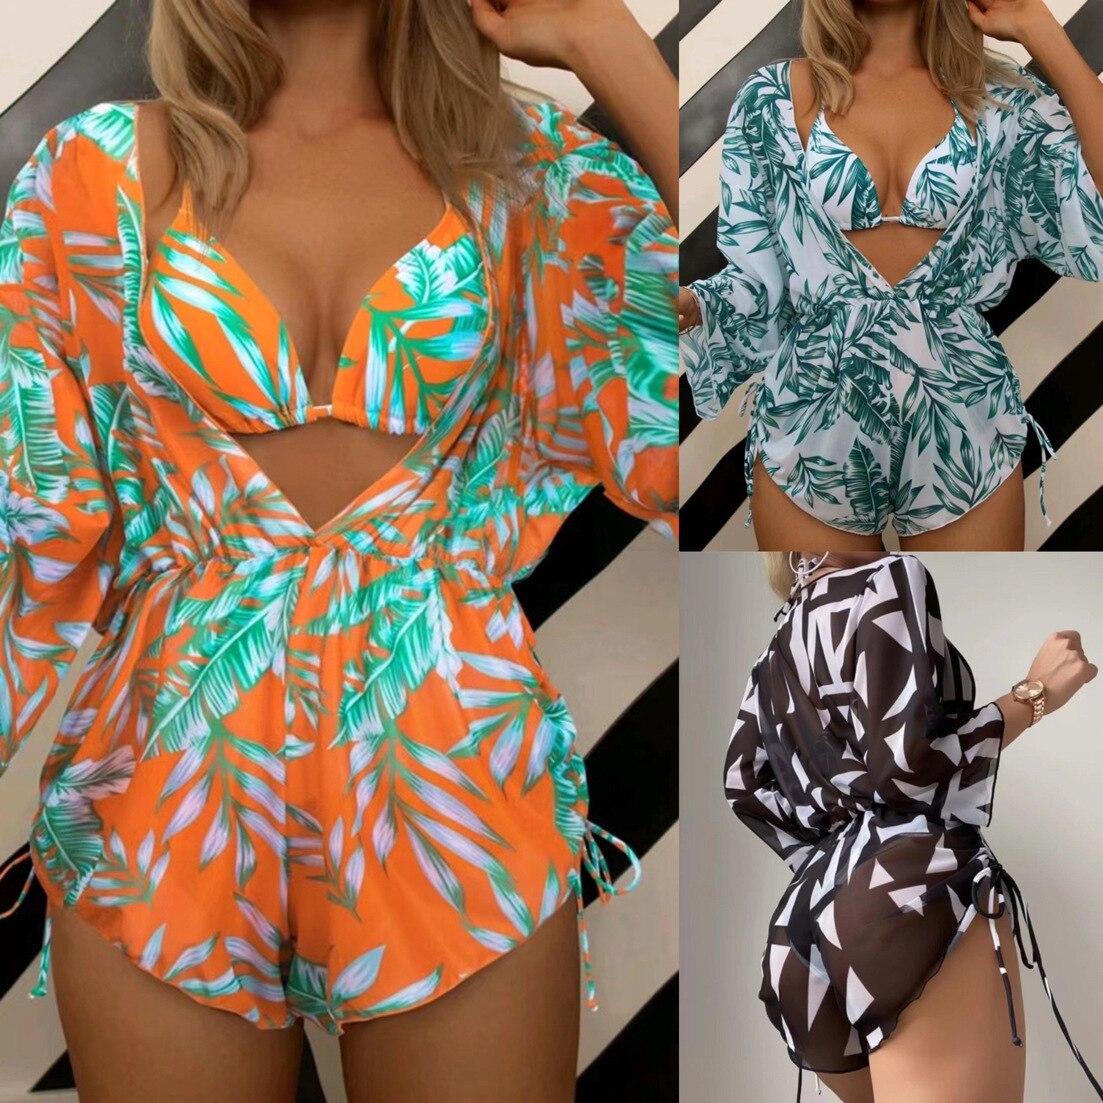 FAFAD Women's Swimwear in a 3-Piece Leaf Plant Print Triangle Halter Neck Bikini Set with Cover Up Drawstring Side Overalls Jumpsuit